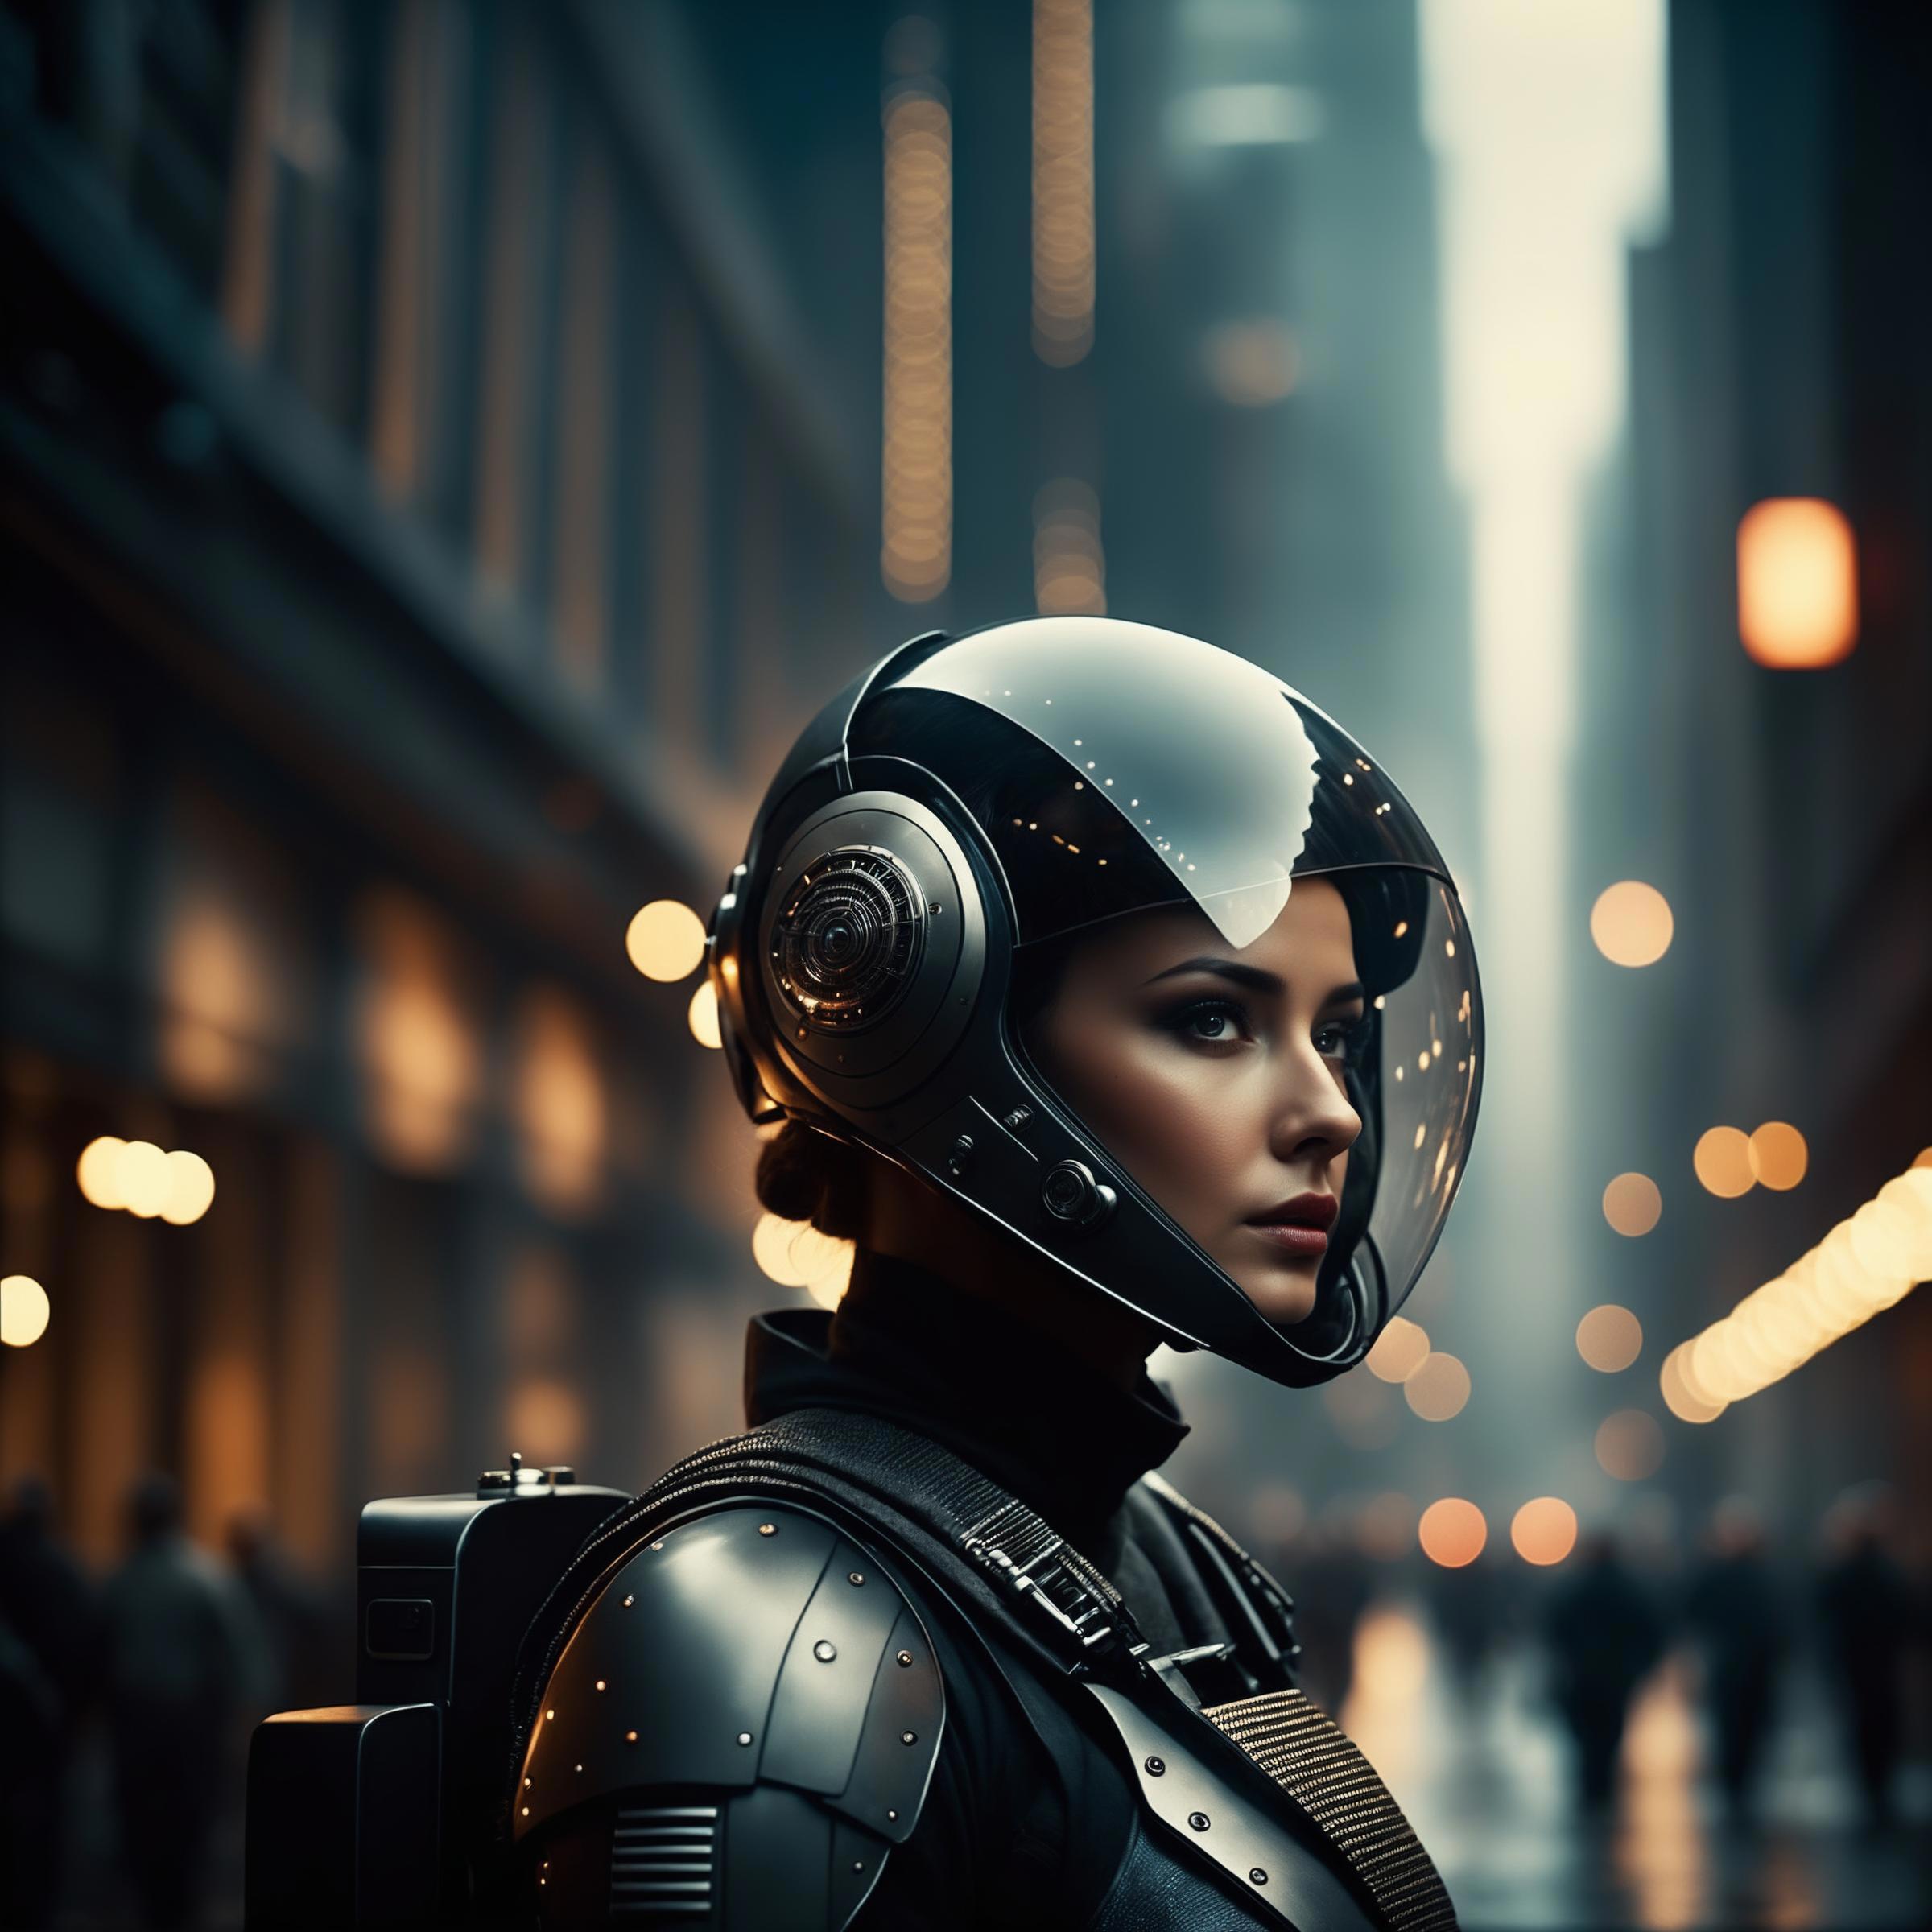 A female astronaut wearing a silver helmet and standing in a crowded city street.